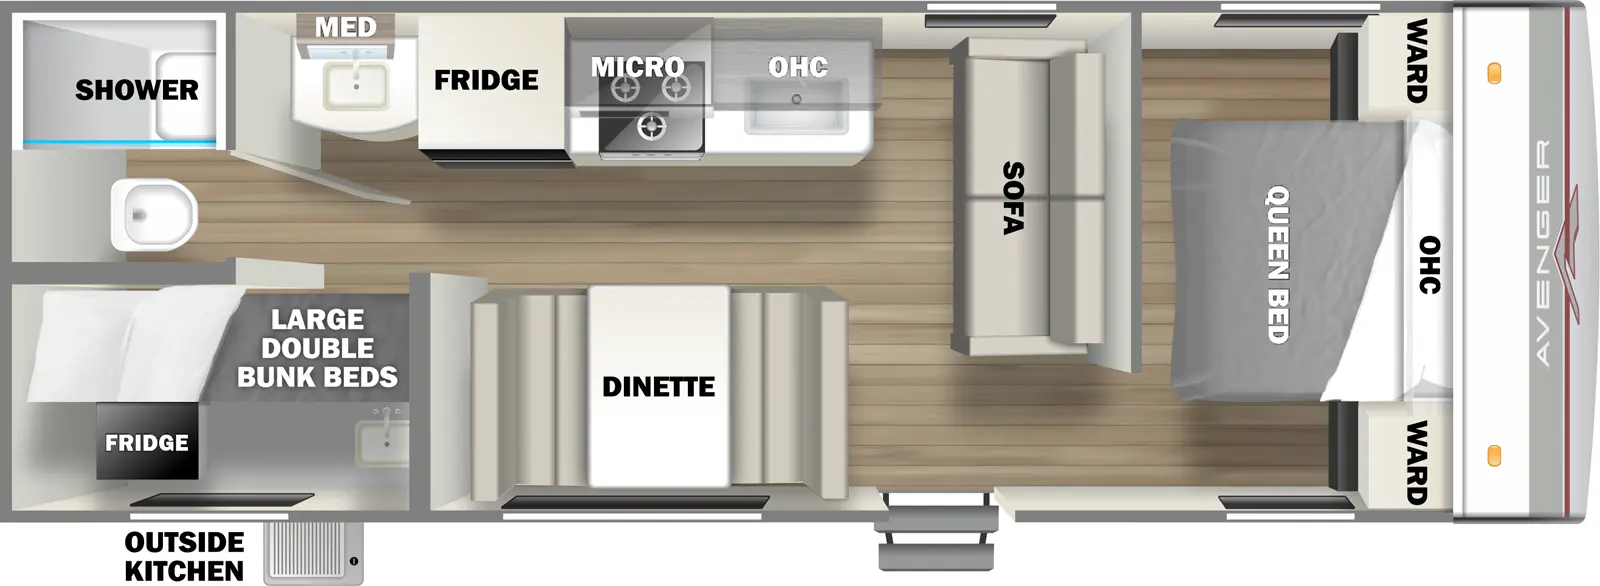 The 26BK has zero slideout and one entry. Exterior features an outside kitchen. Interior layout front to back: foot facing queen bed with overhead cabinet and wardrobes on each side; sofa along inner wall; off-door side kitchen counter with sink, overhead cabinet, microwave, cooktop, and refrigerator; door side entry and dinette; rear off-door side sink with medicine cabinet outside bathroom with shower and toilet only; rear door side large double bunk beds.